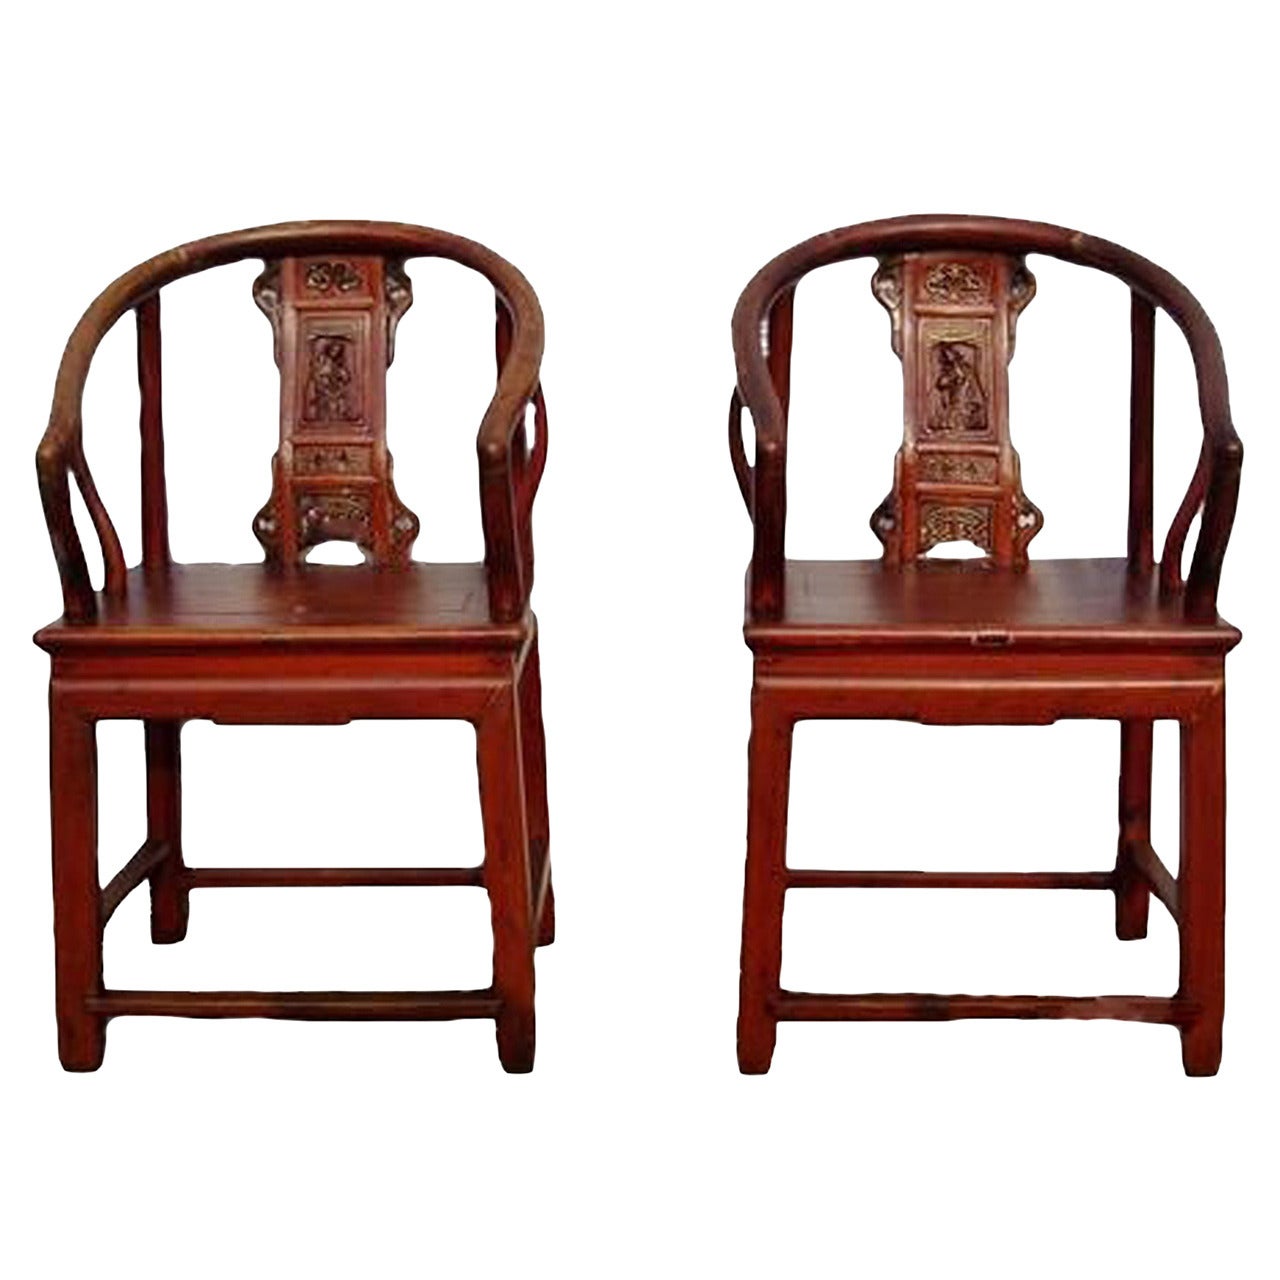 Antique Chinese Chairs, Horseshoe, Pair For Sale